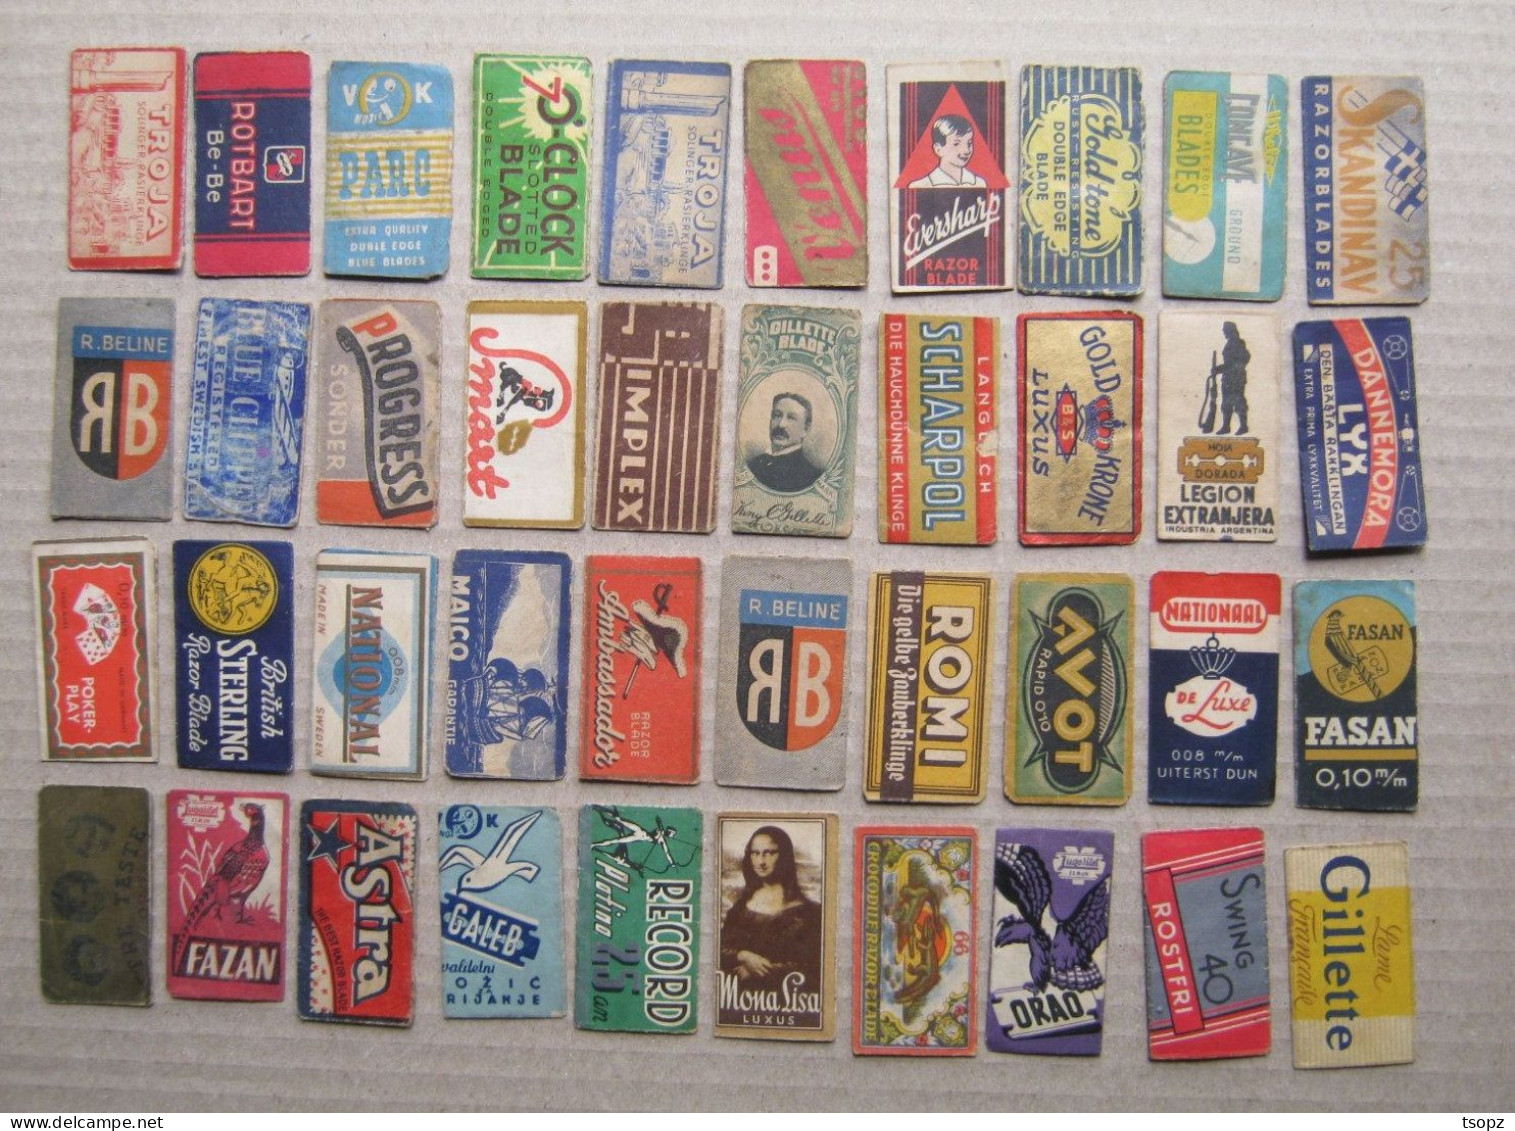 Collection old razor blades wrappers ( about 150 pieces )